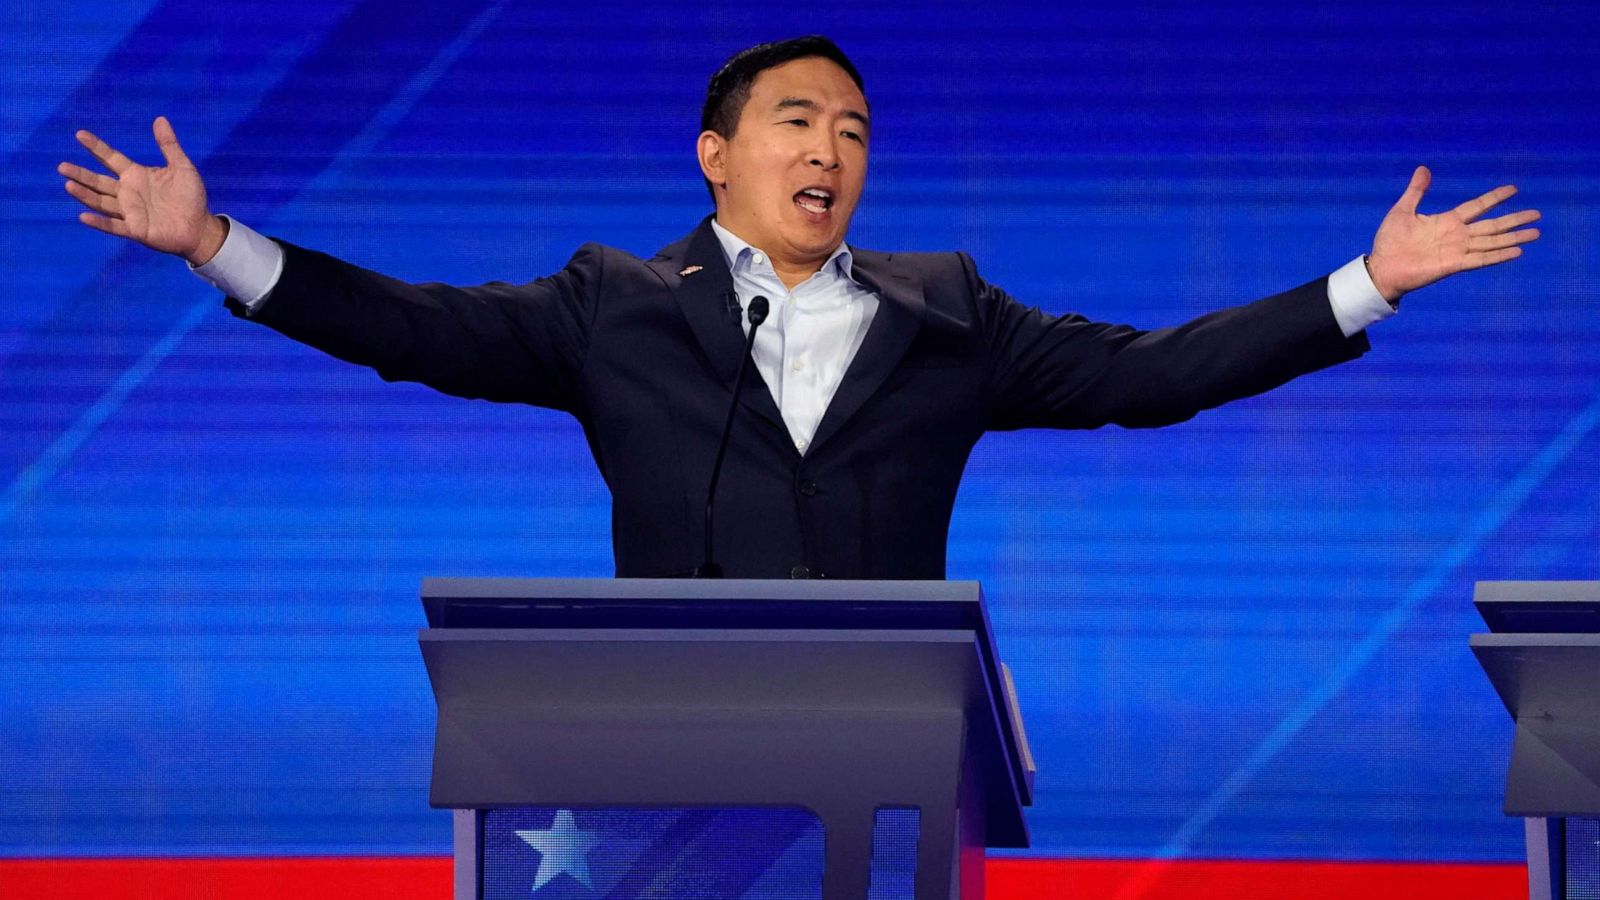 Andrew Yang officially announced his candidacy for mayor of New York City.